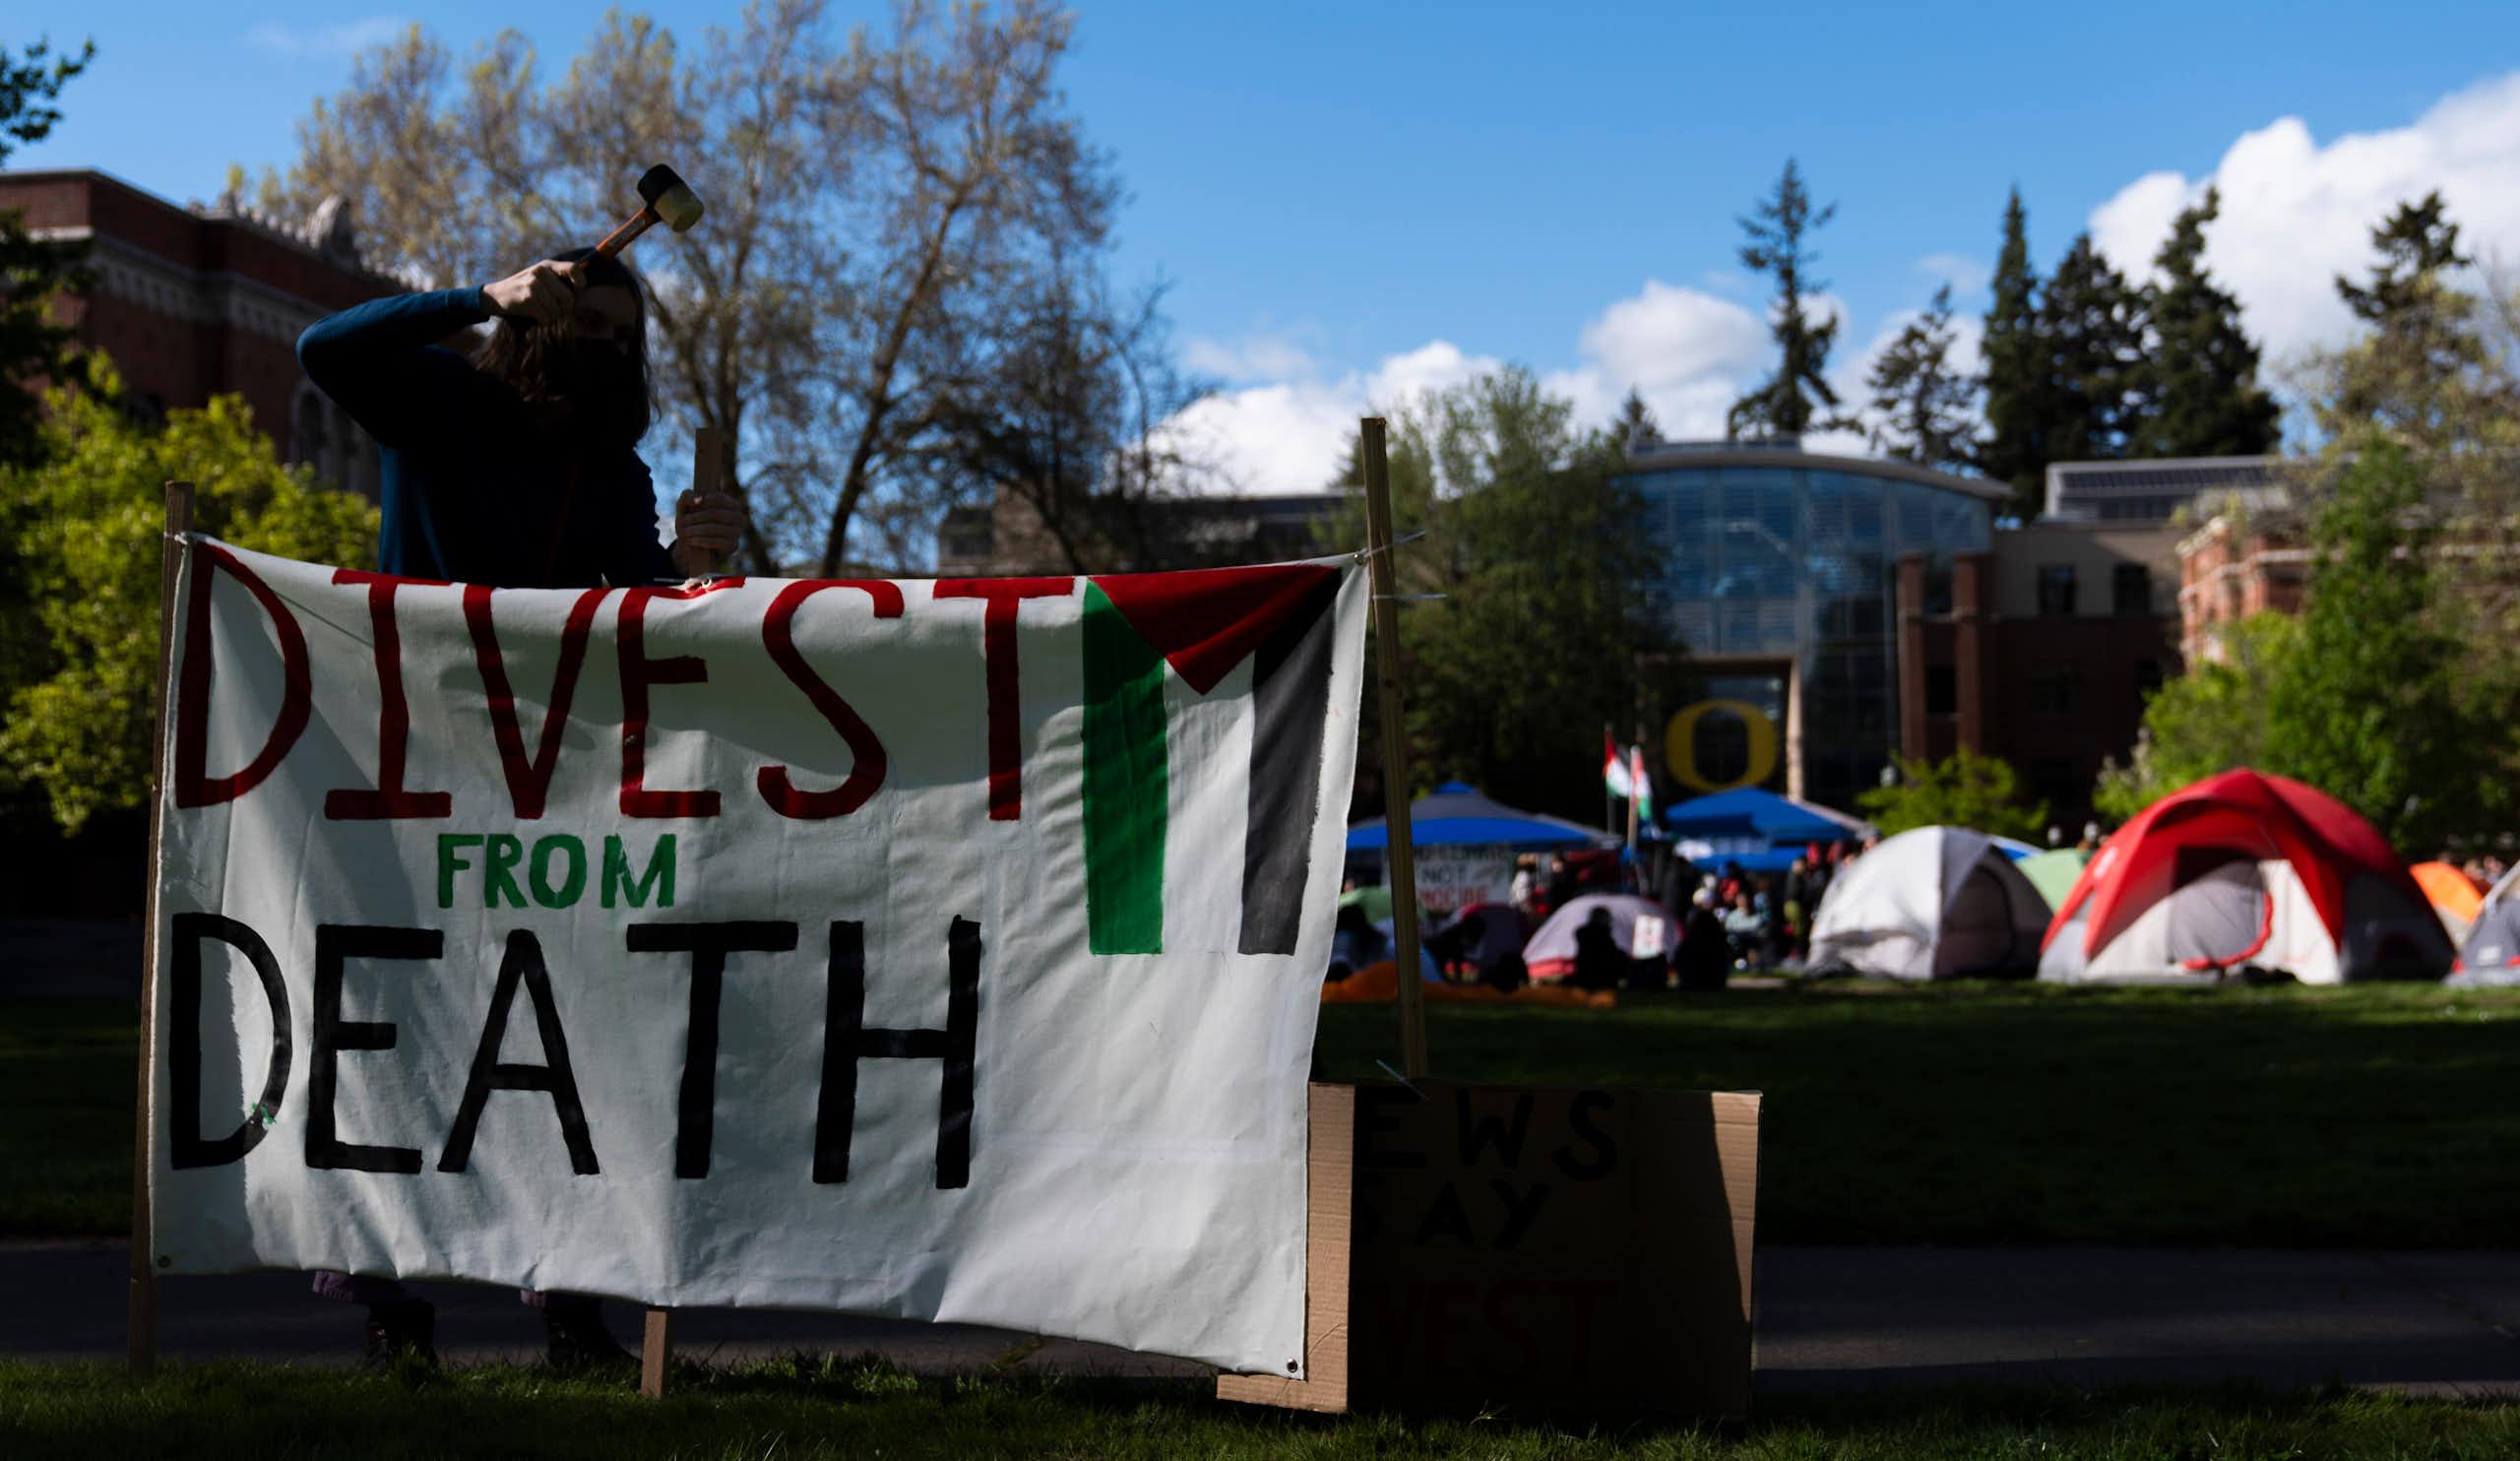 A student at the University of Oregon sets up a sign that reads 'Divest from death' at a campus encampment.